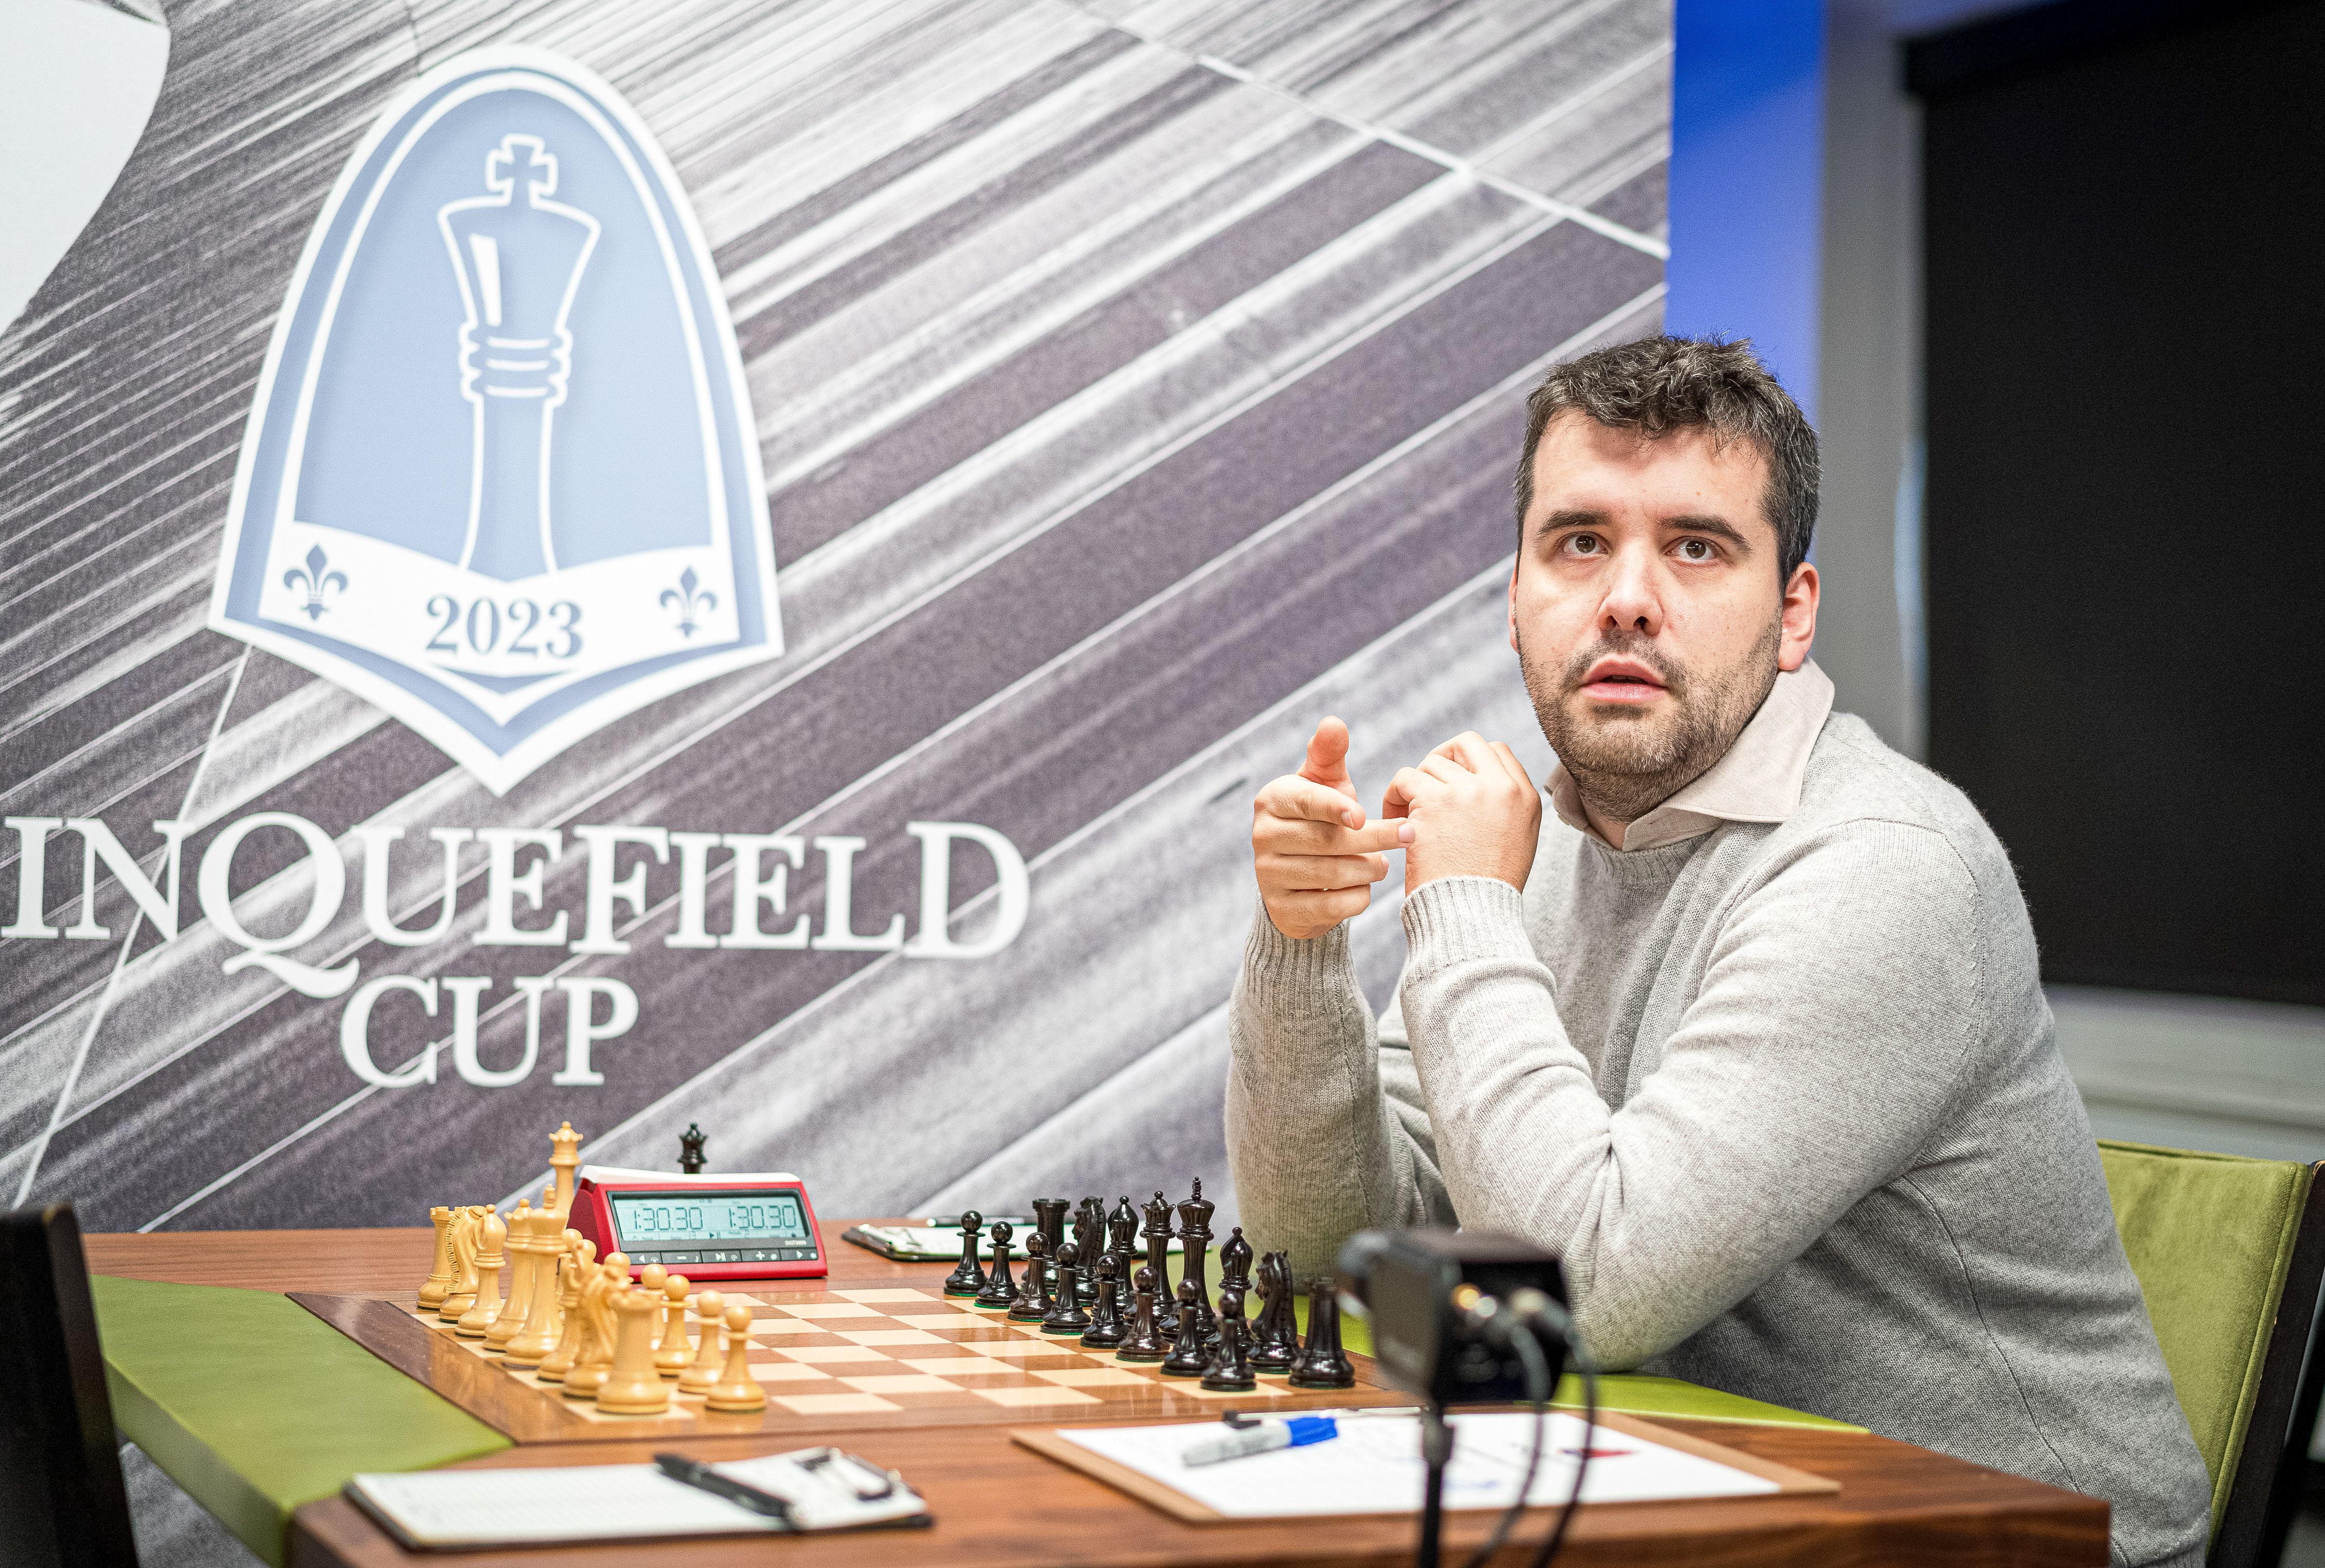 Check the results and standings after the round one of #SinquefieldCup  #GrandChessTour #chess #chesstournament #fabianocaruana #duda…